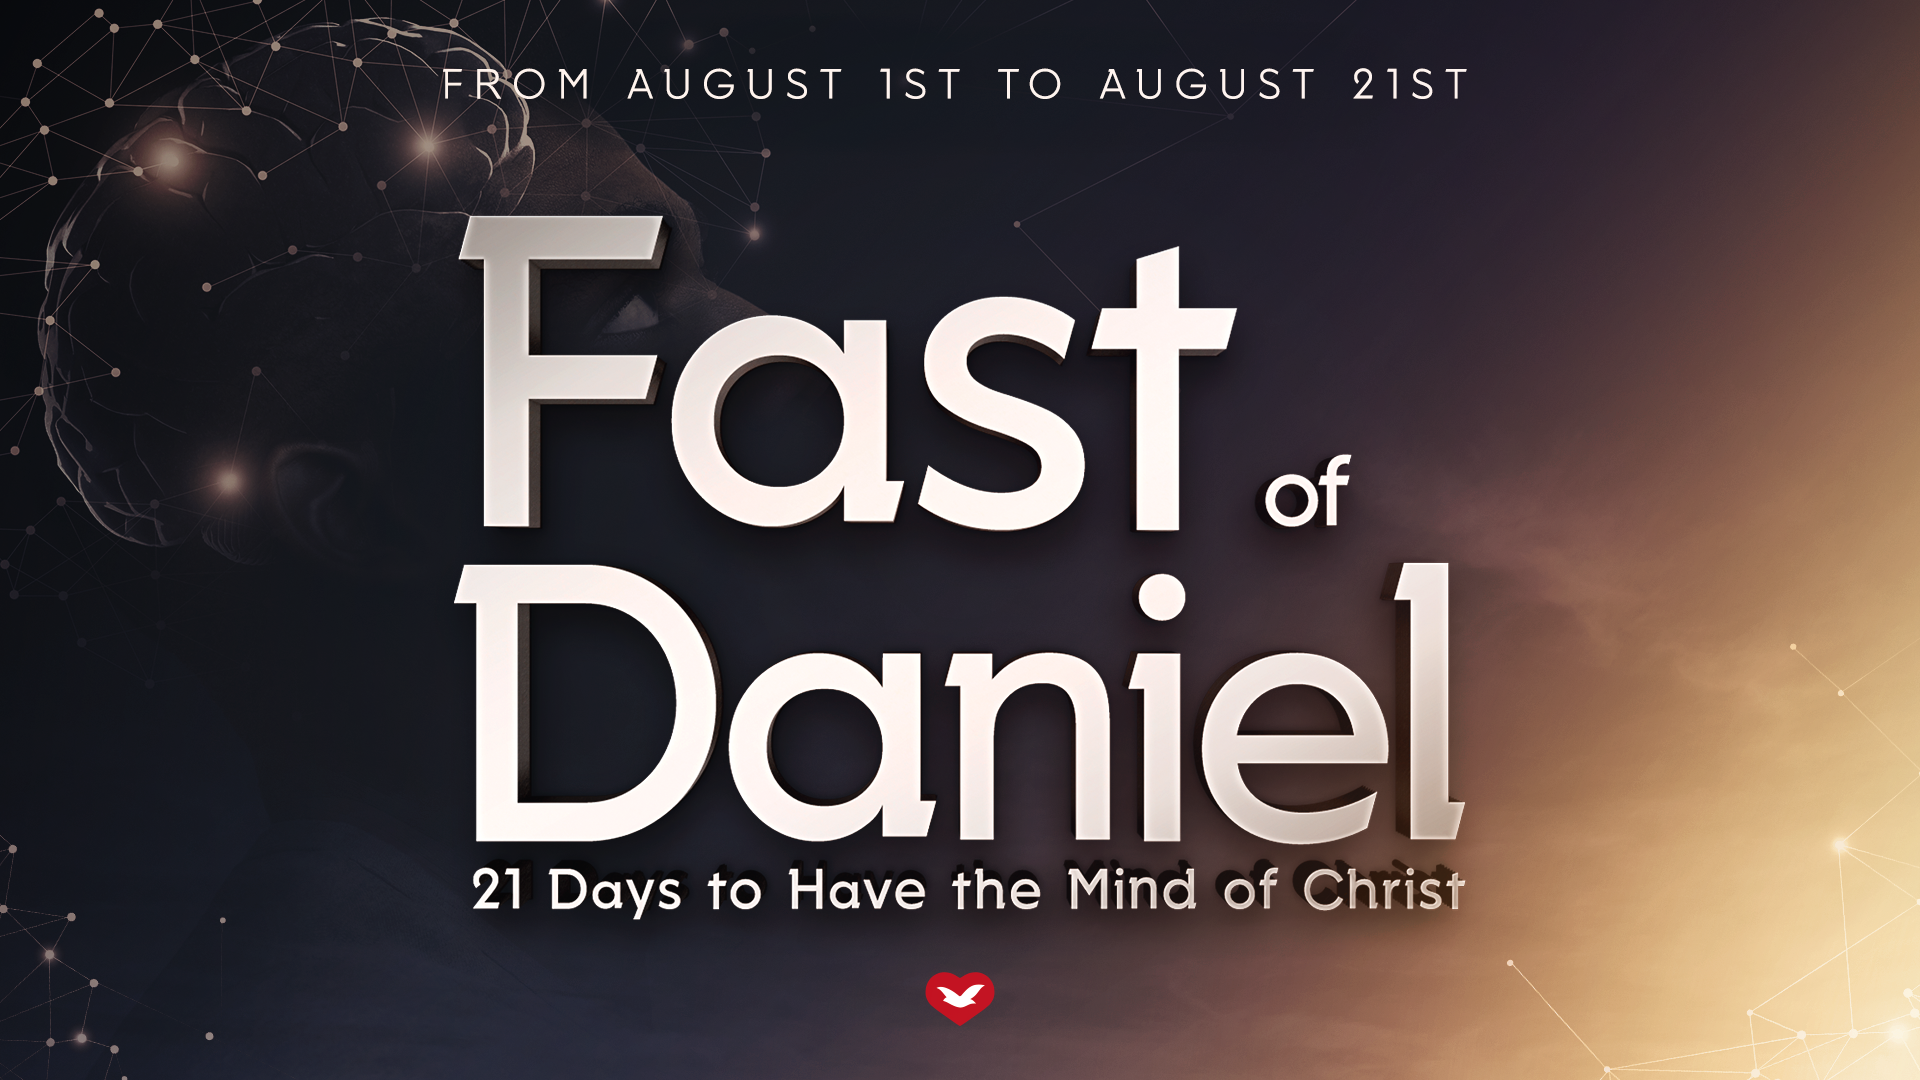 August 22nd: Prepare Yourself for This Special Service in Every Universal Church1 min read